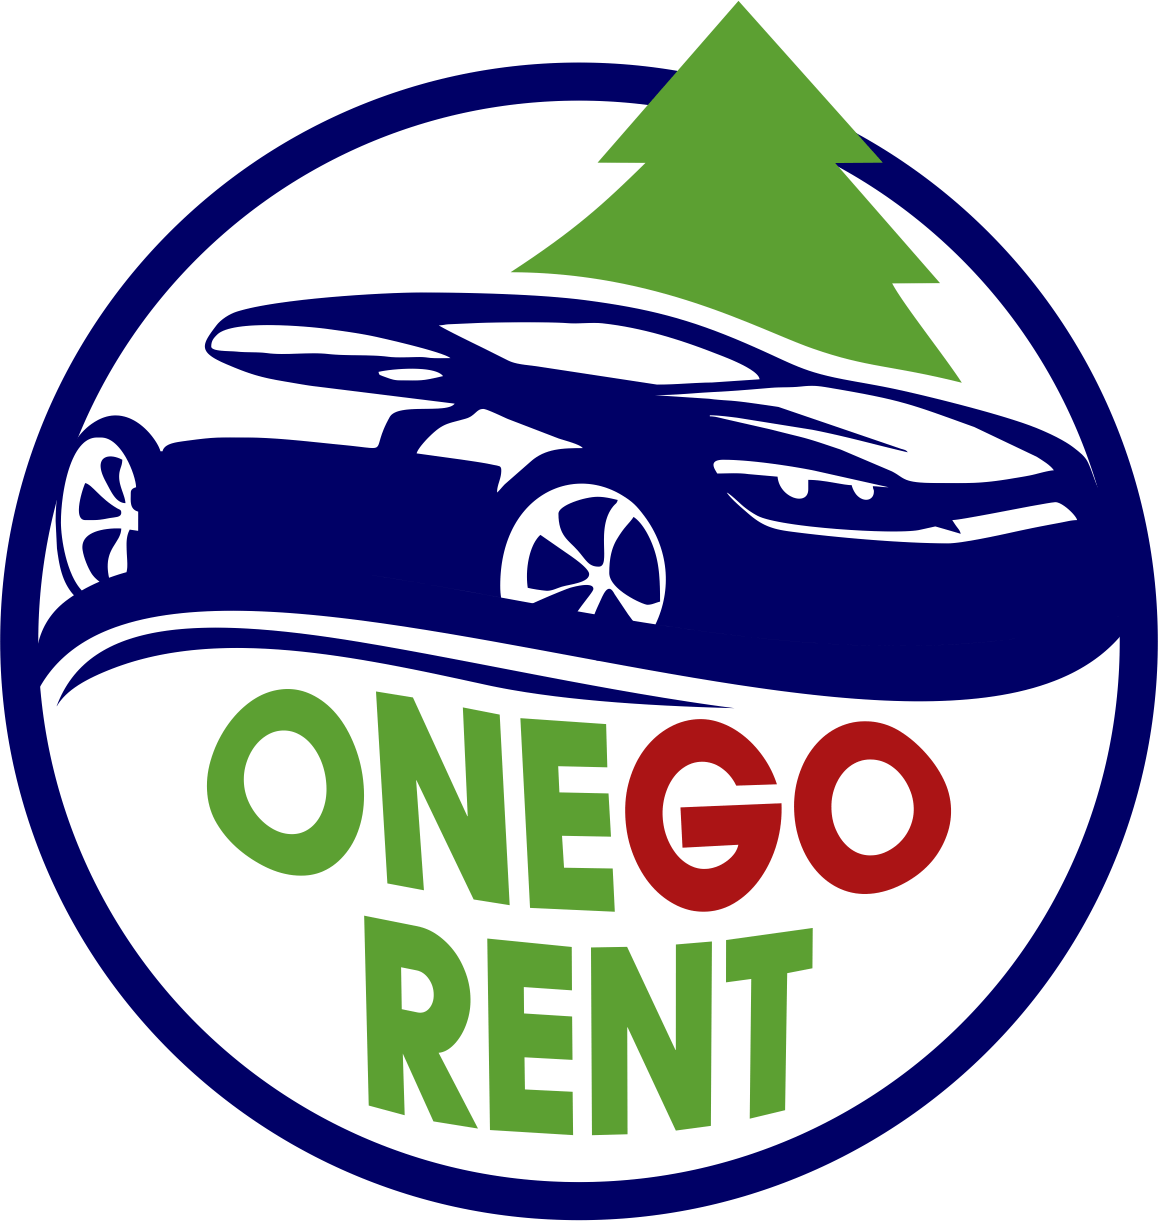 ONEGORENT